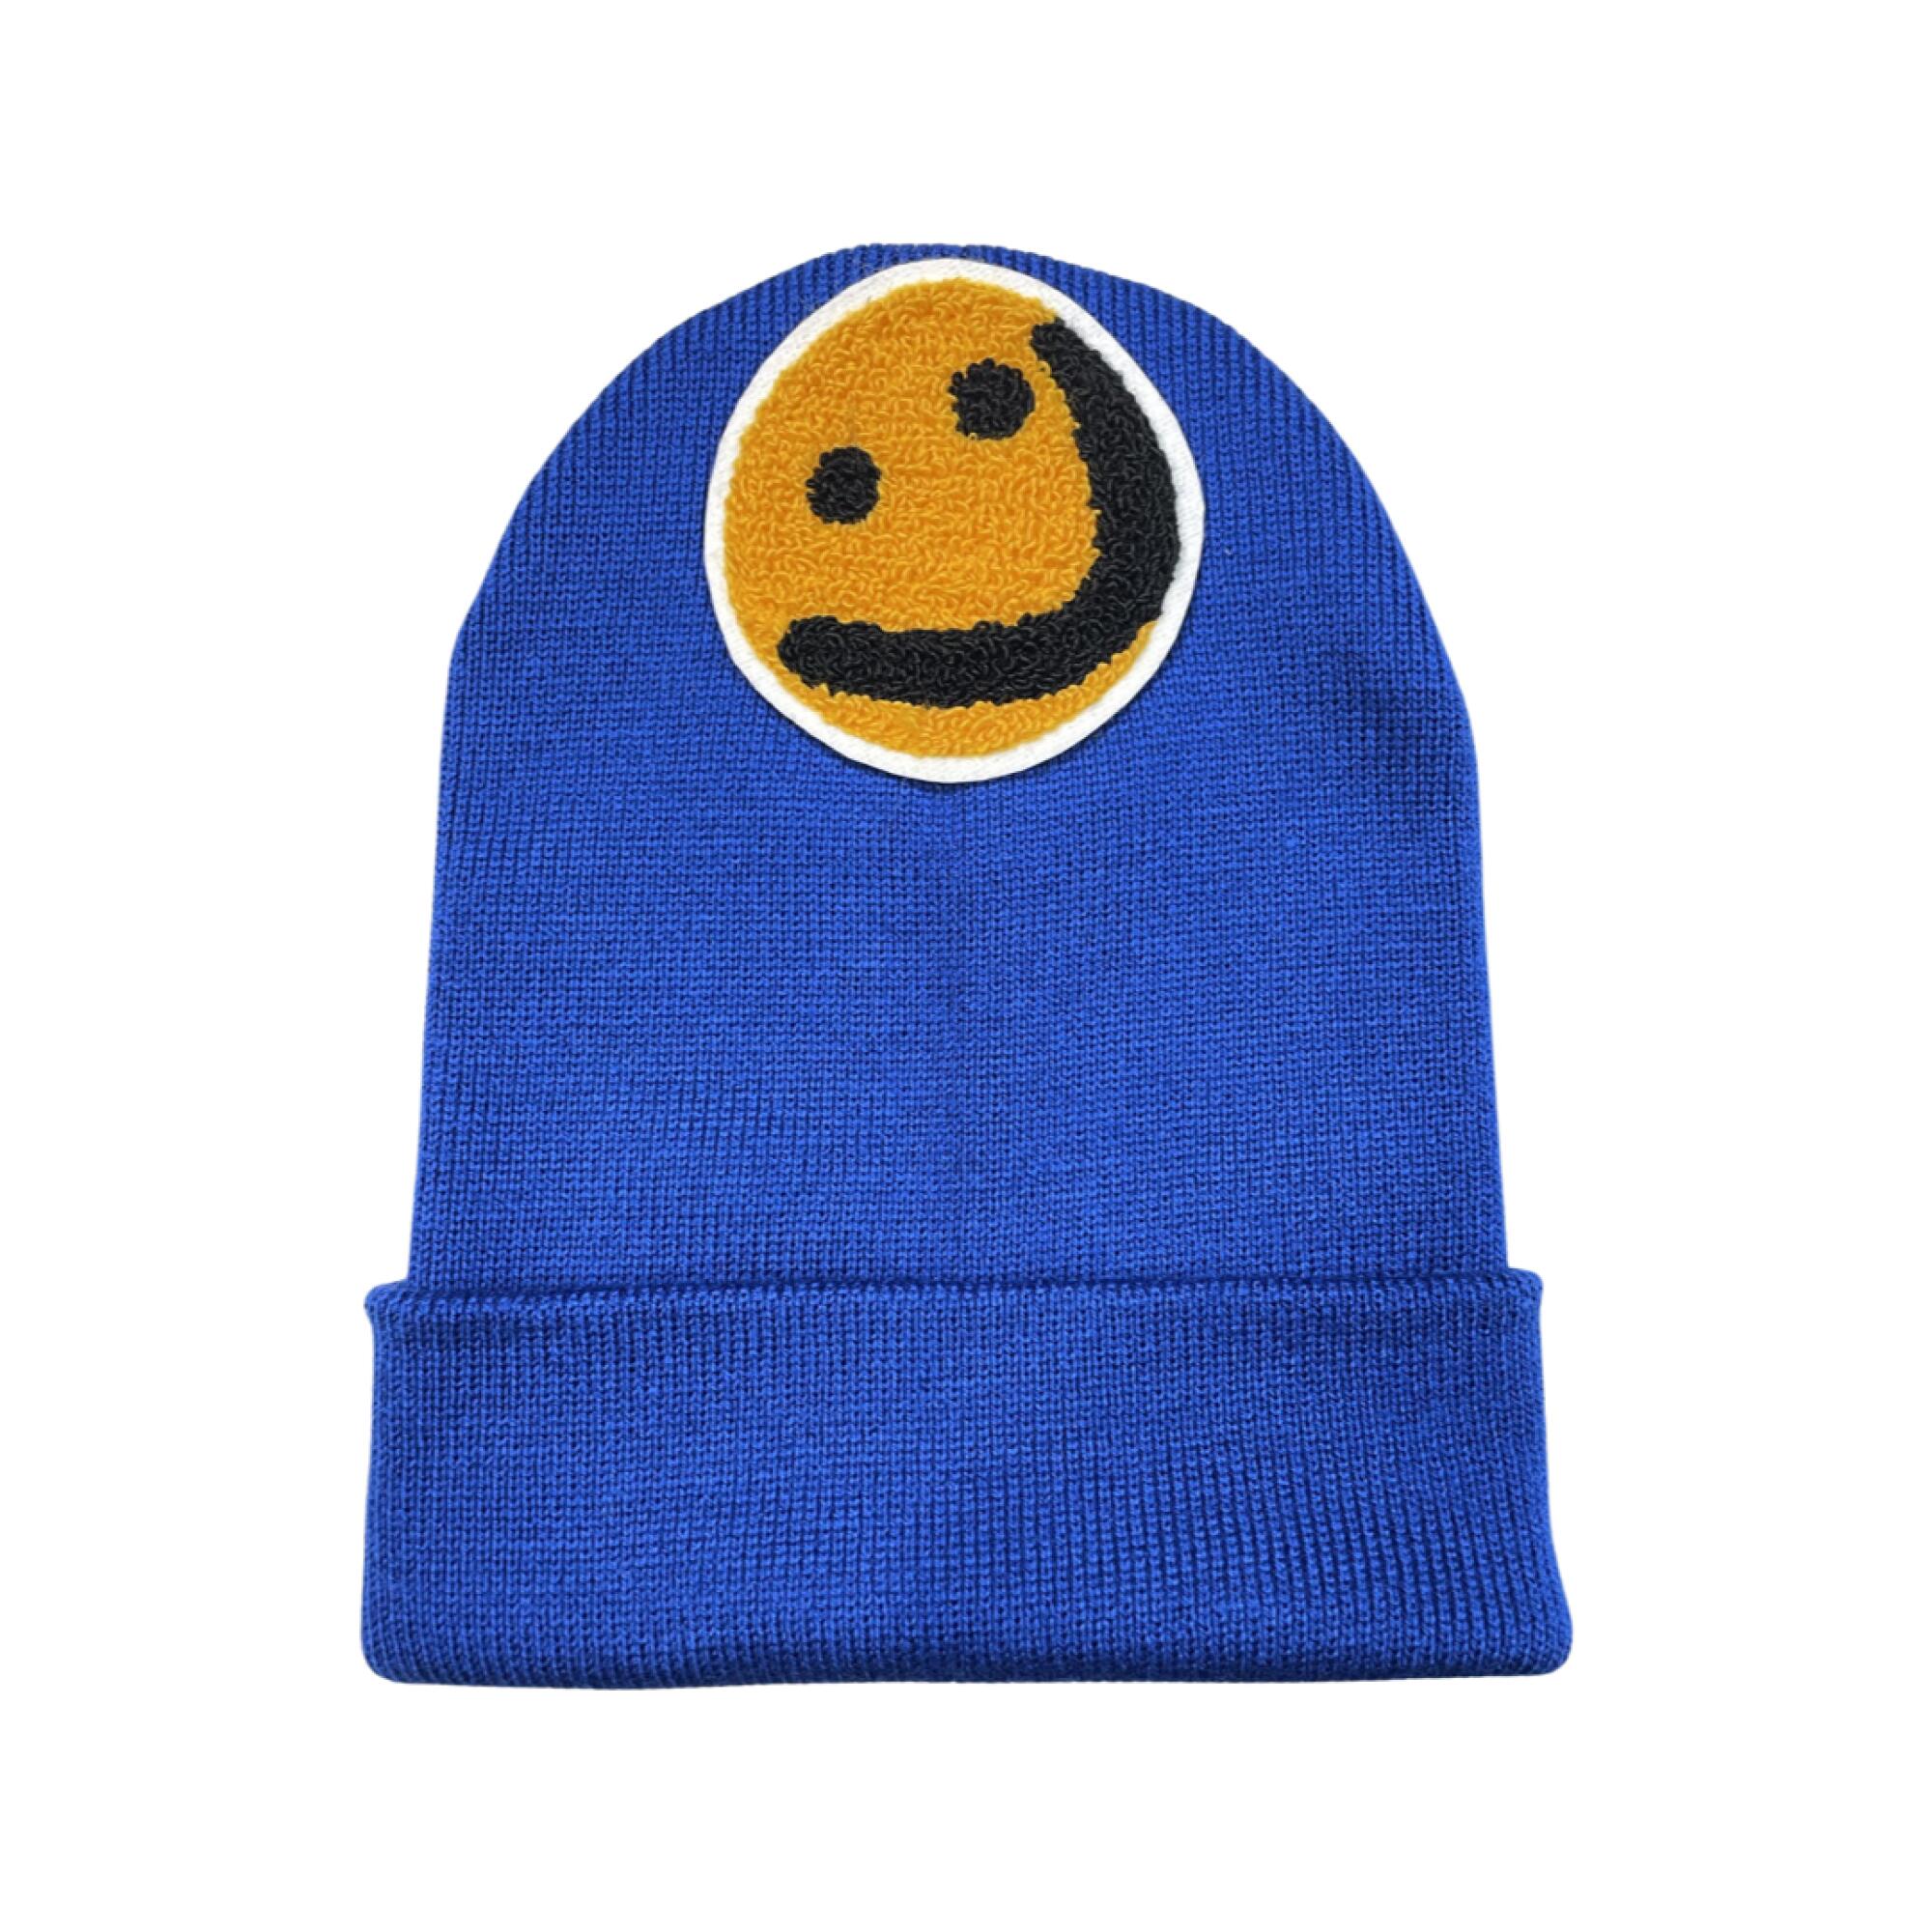 blue beanie hat with a yellow smiley face patch